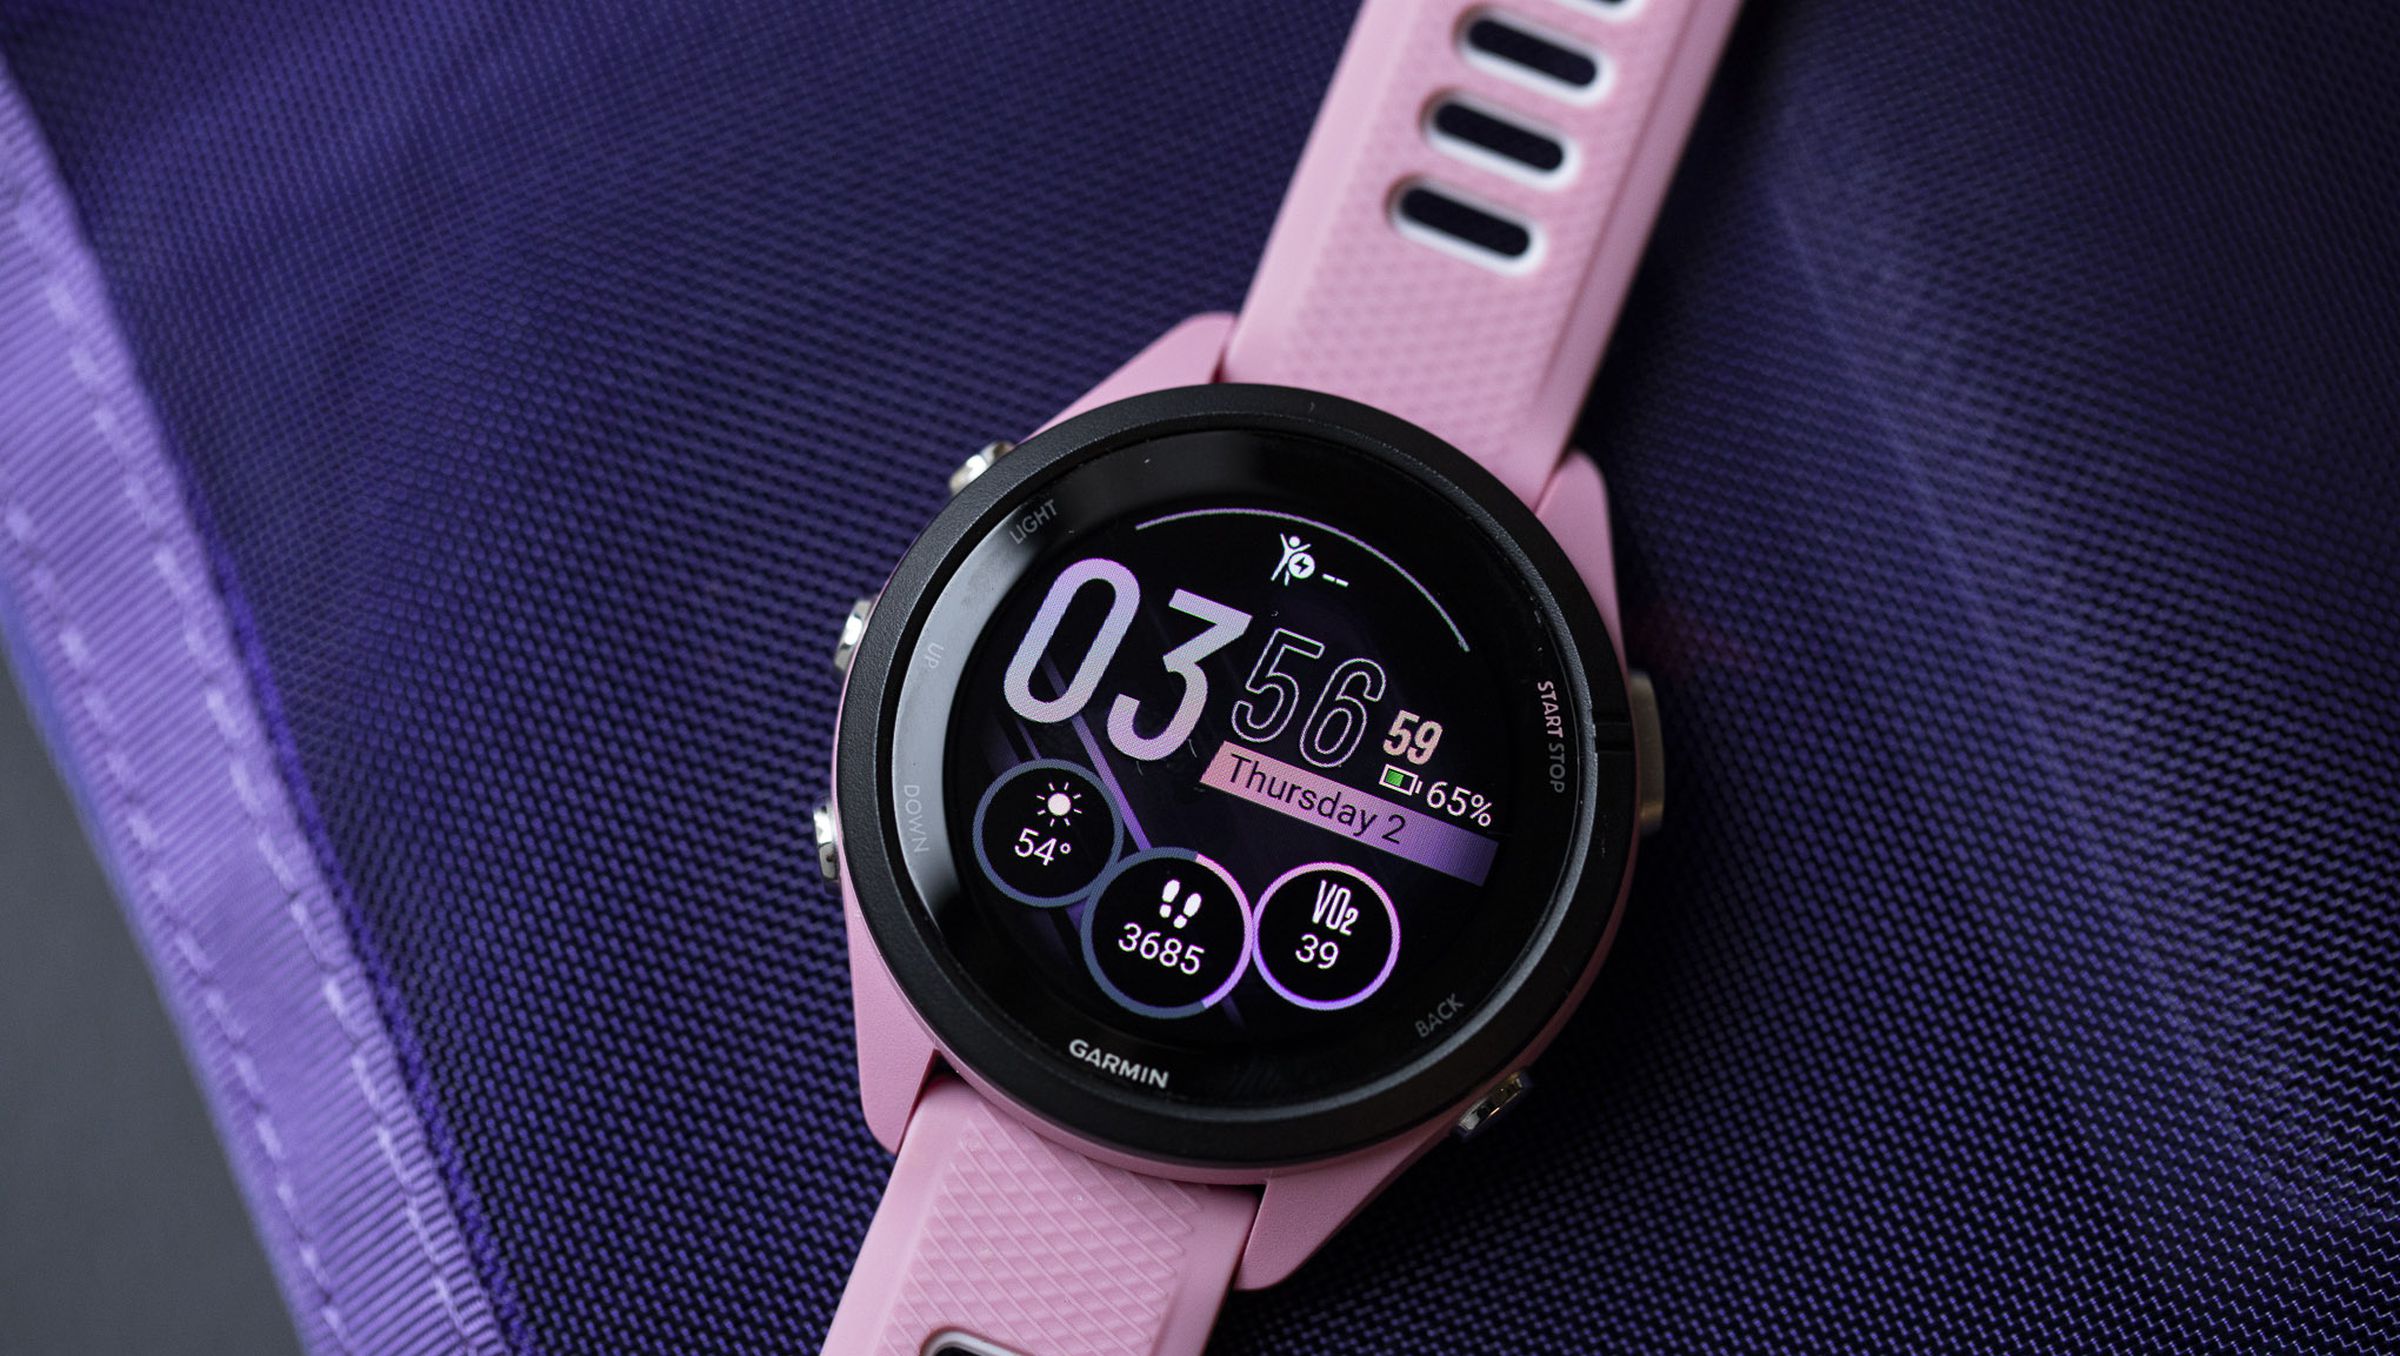 Close-up of the Garmin Forerunner 265S’s OLED display and watchface on a purple background